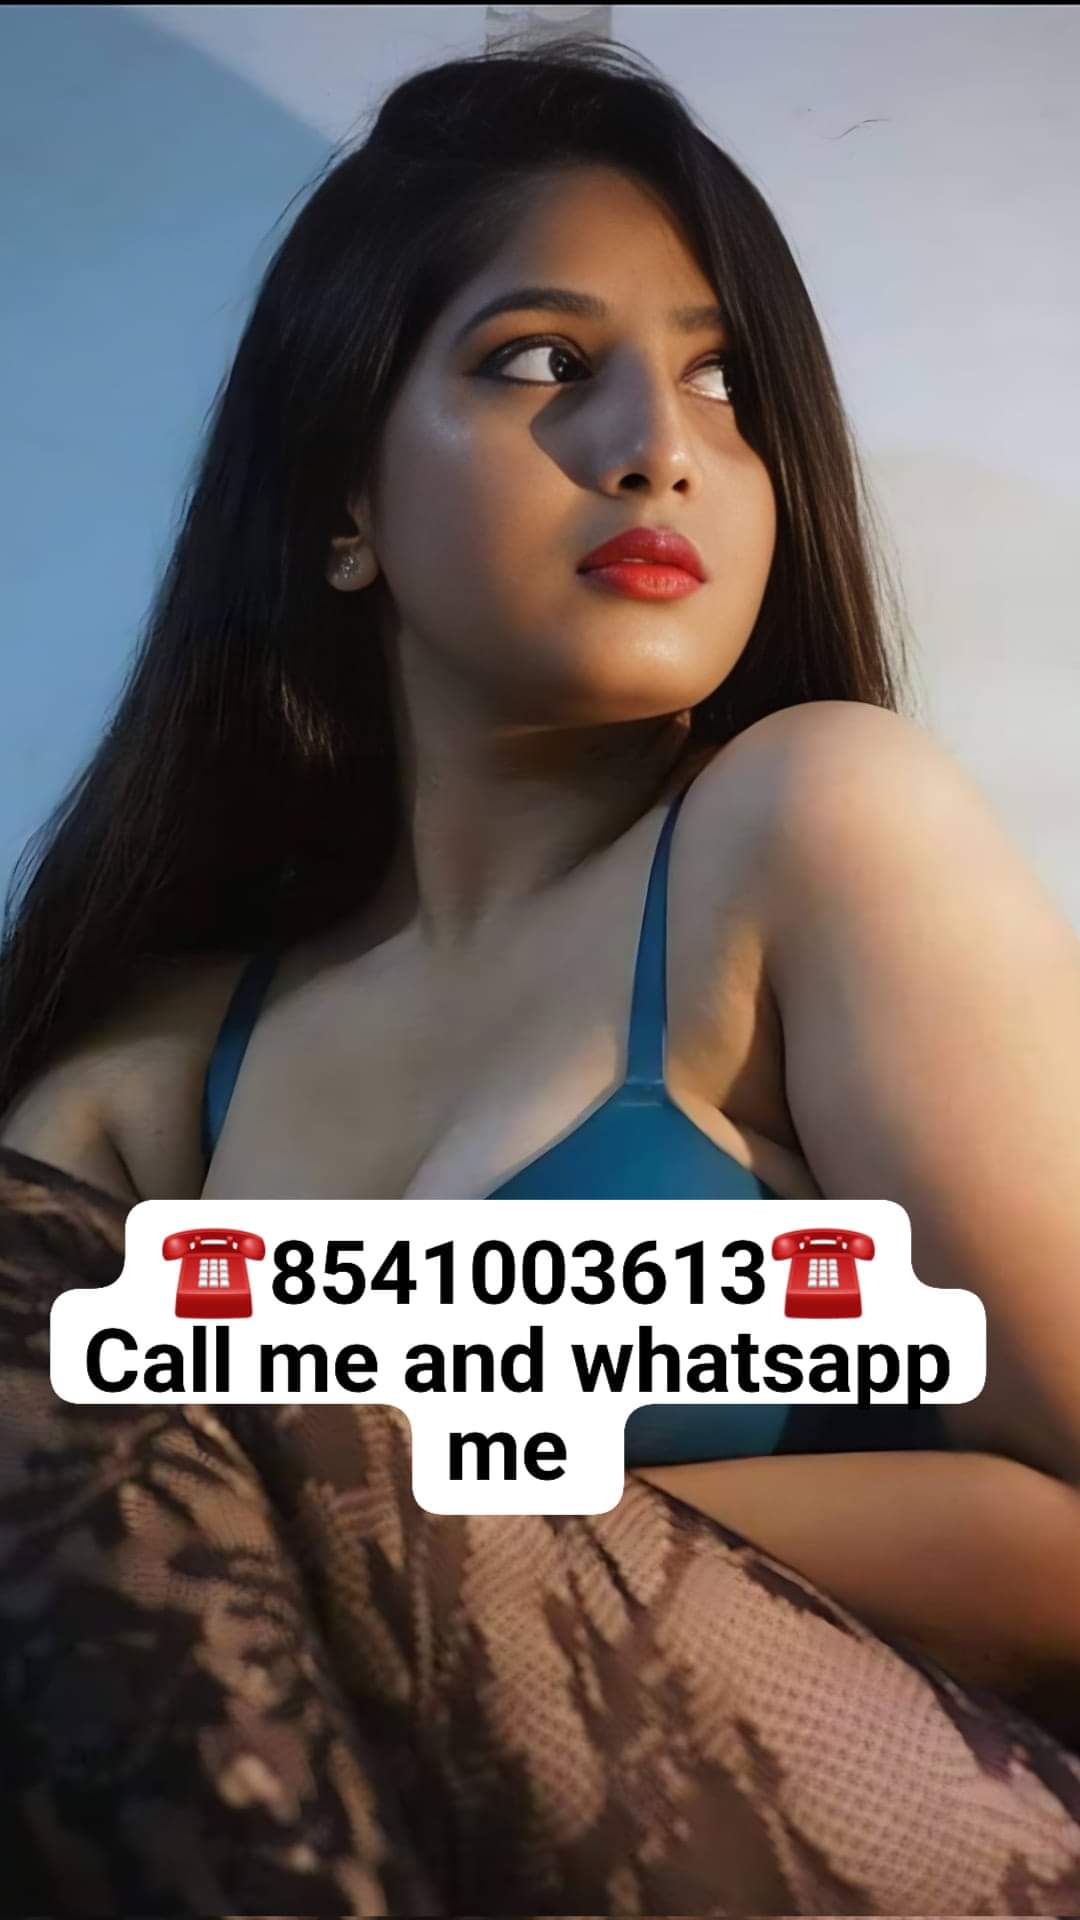 Mumbai Central call girls available hot and sexy college girls